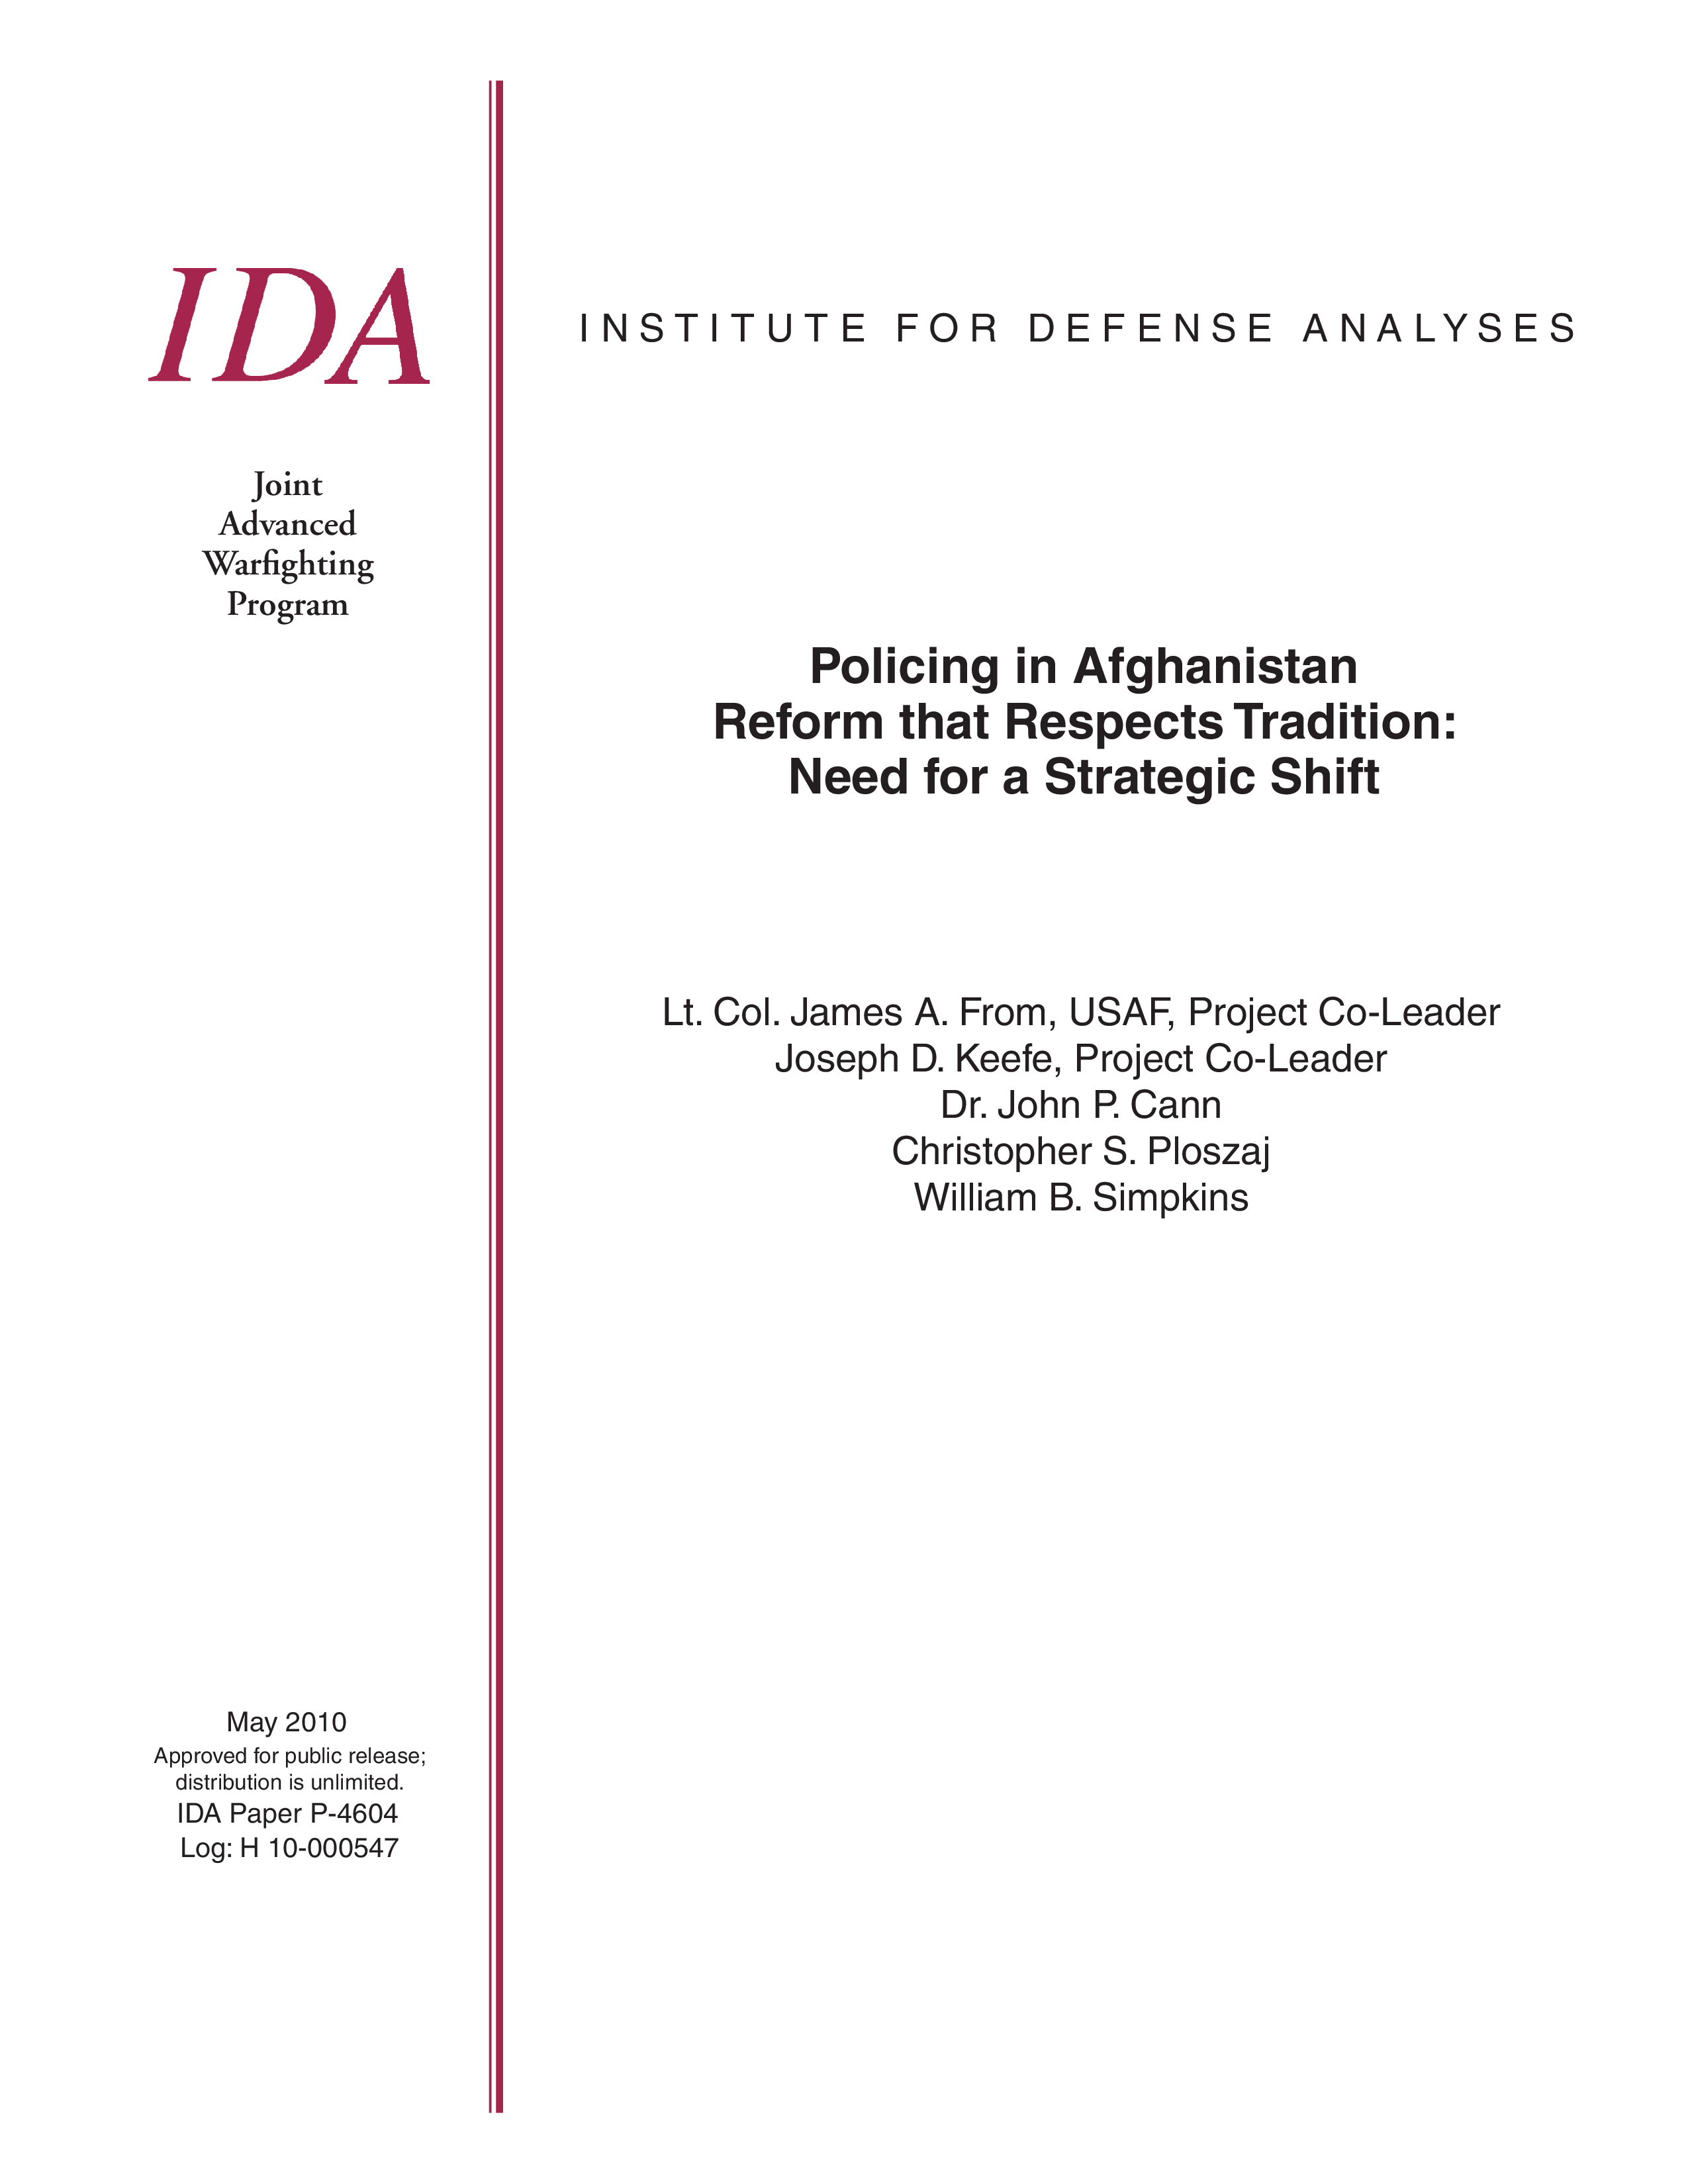 Policing in Afghanistan Reform that Respects Tradition: Need for a Strategic Shift